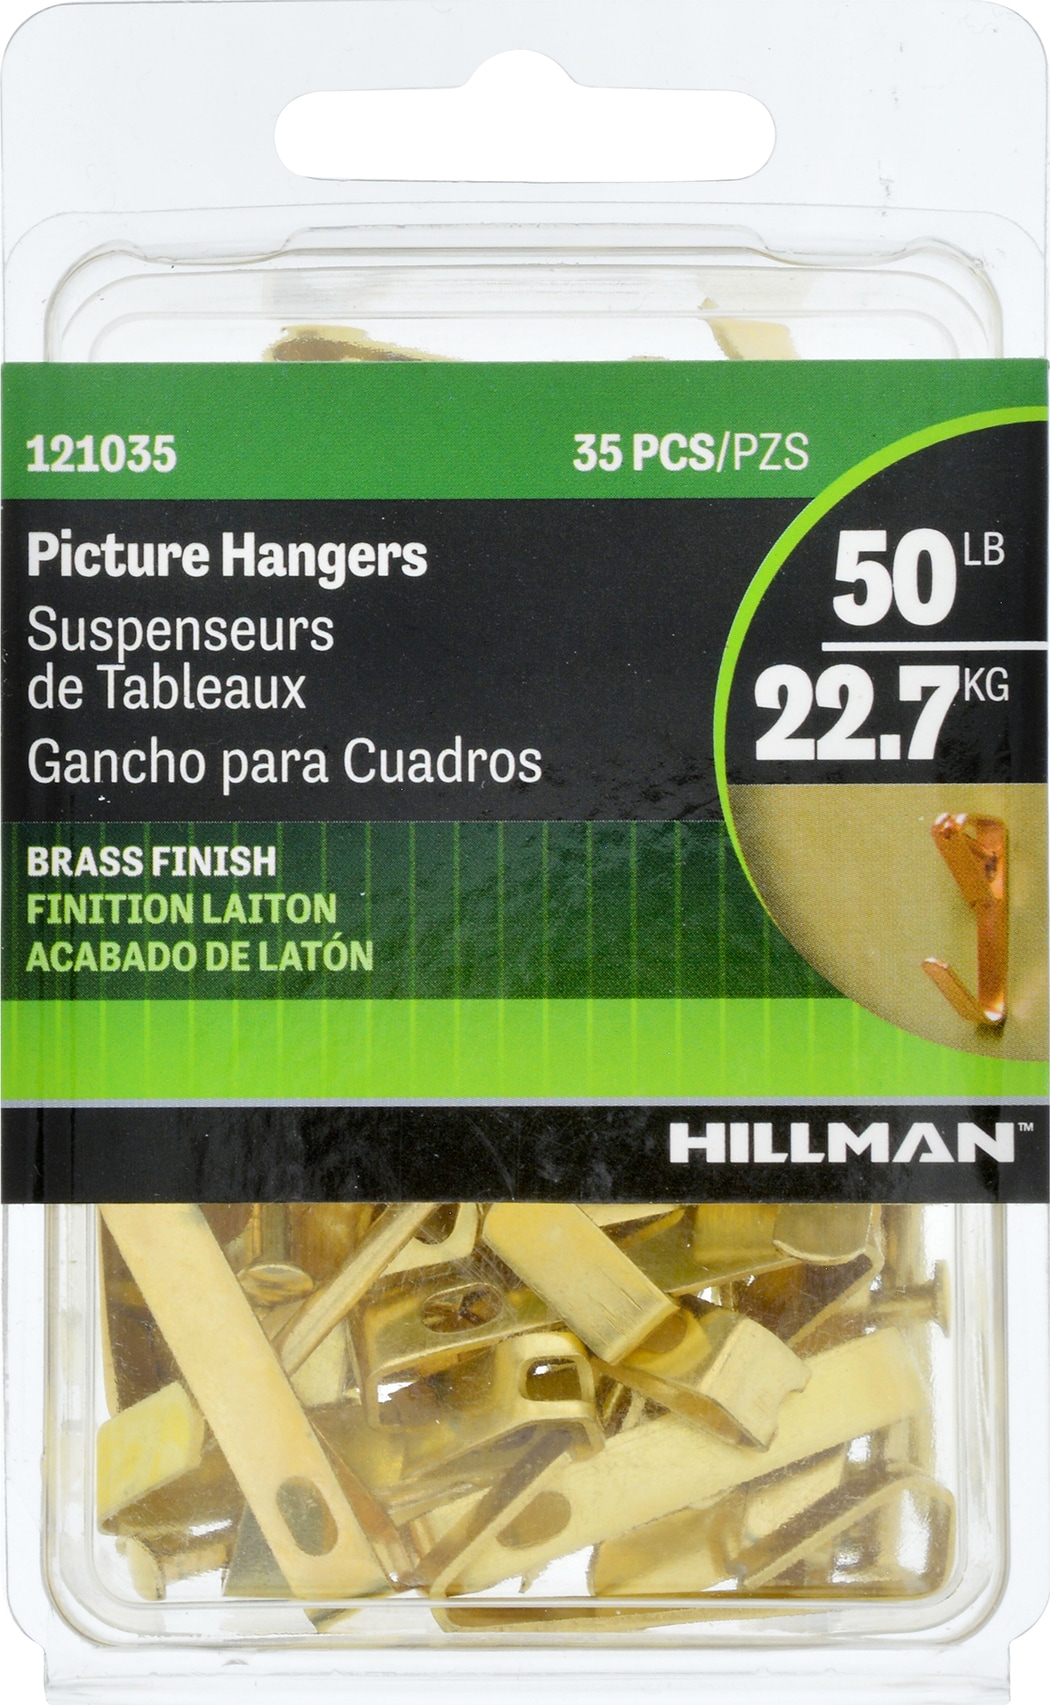 Hillman 50Lb Brass Picture Hangers in the Picture Hangers